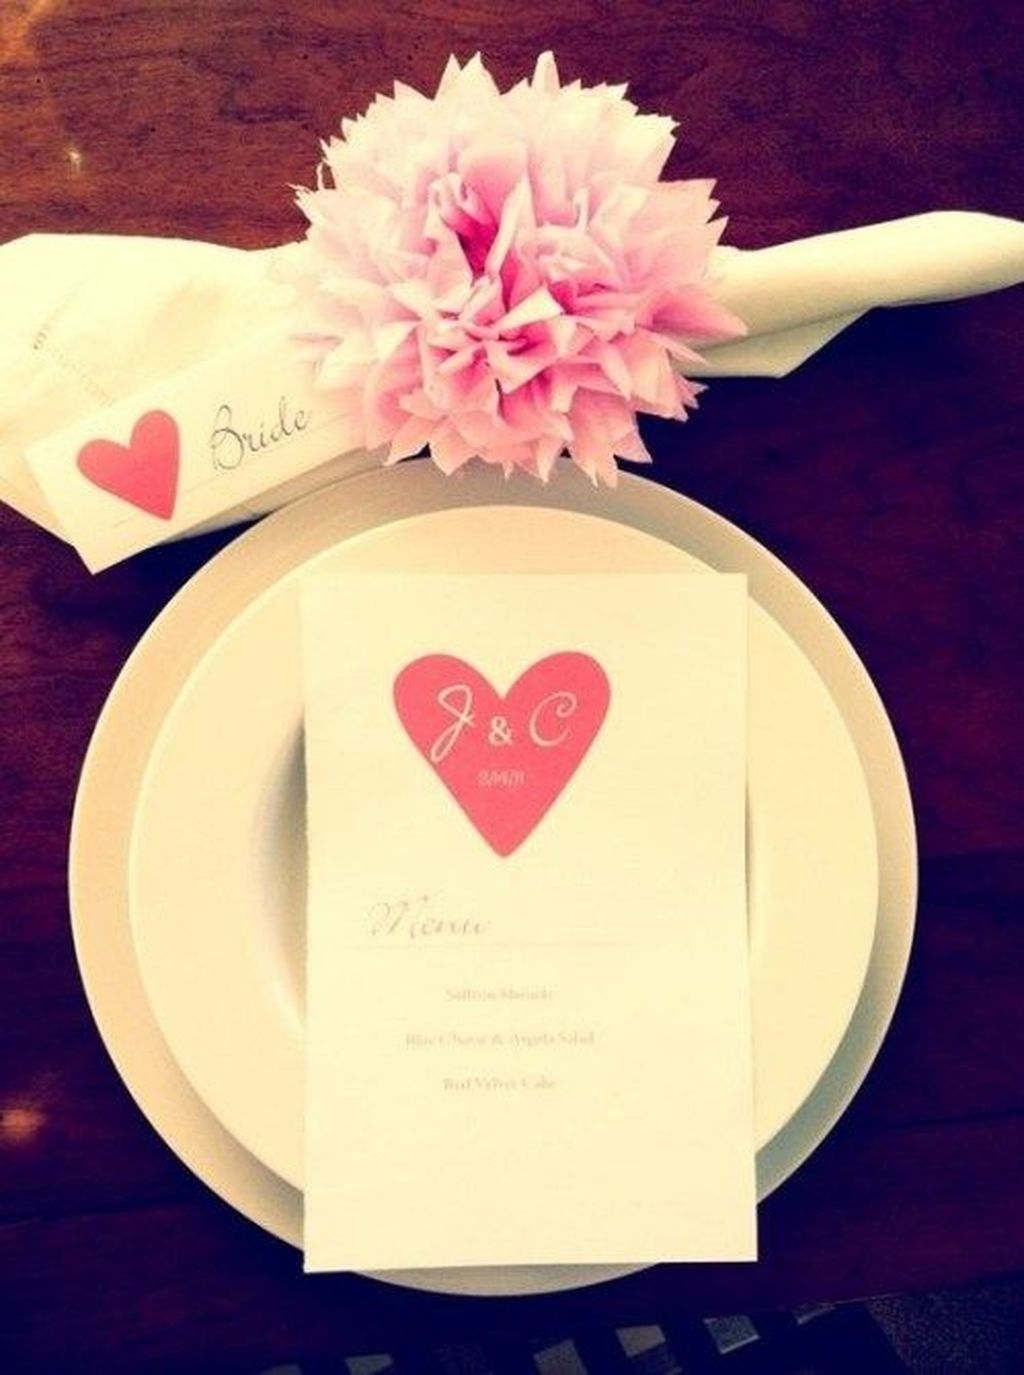 Most Inspiring Valentine’s Day Simple Table Decoration Ideas 20